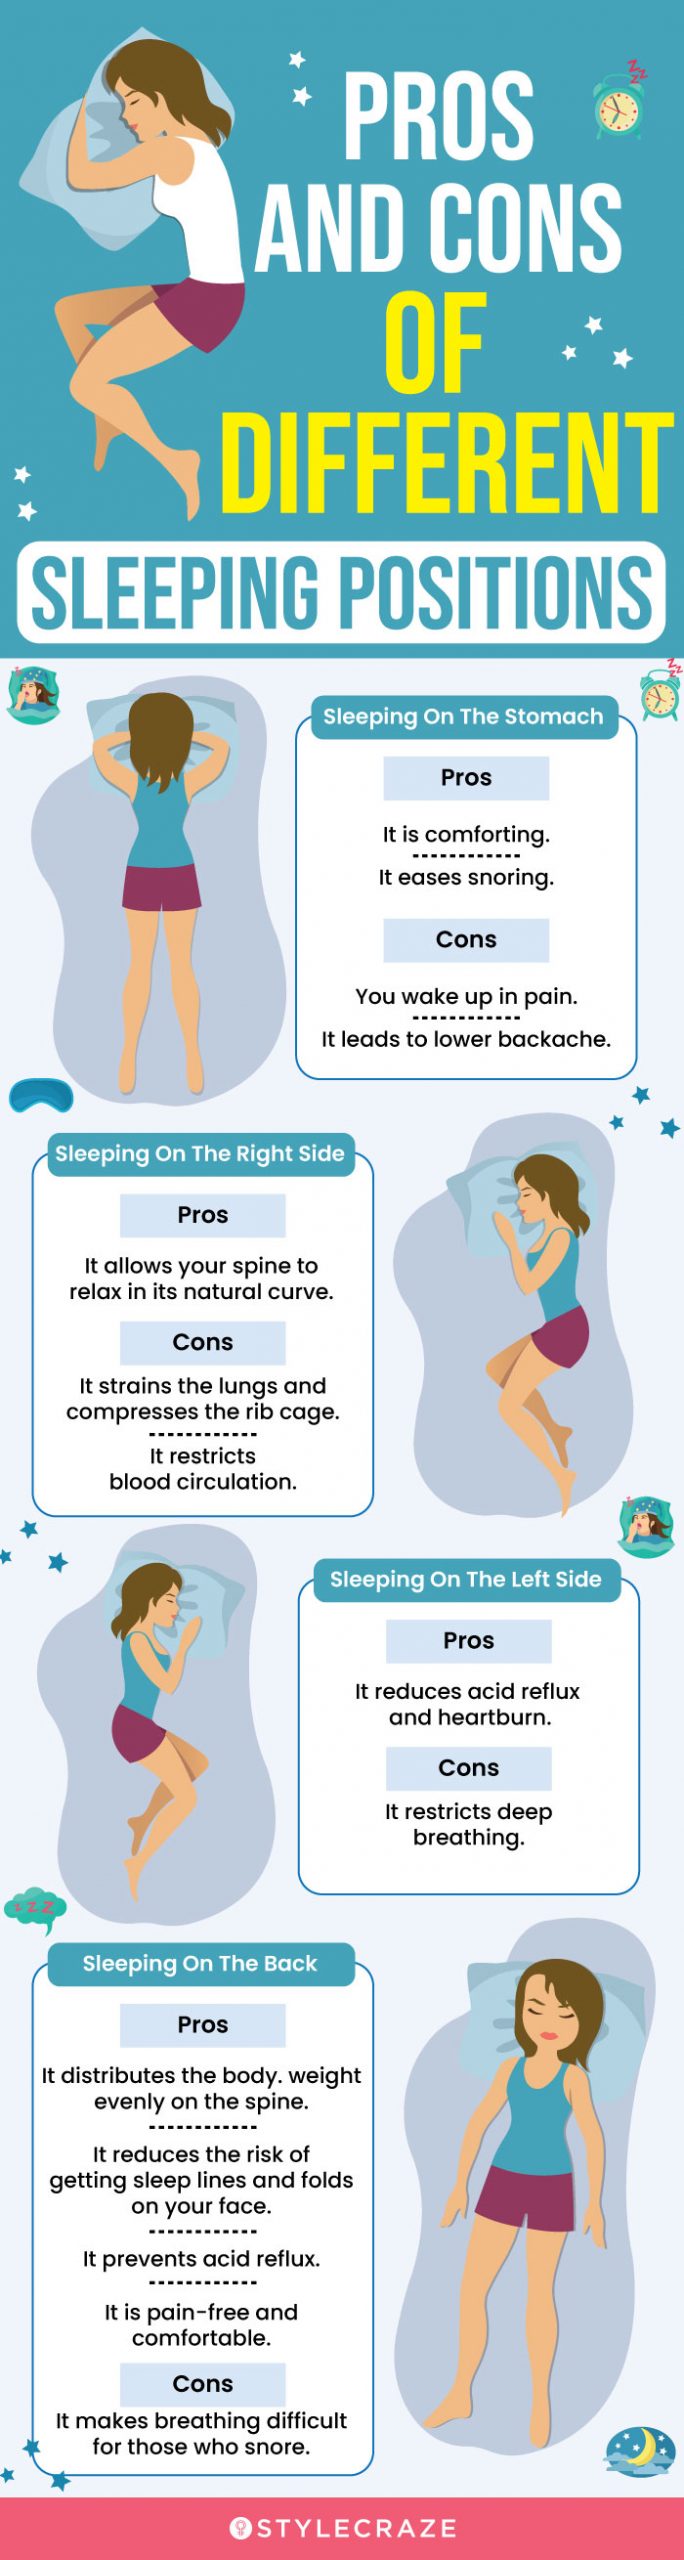 Do You Have a Healthy Sleeping Position | The Prolotherapy Clinic